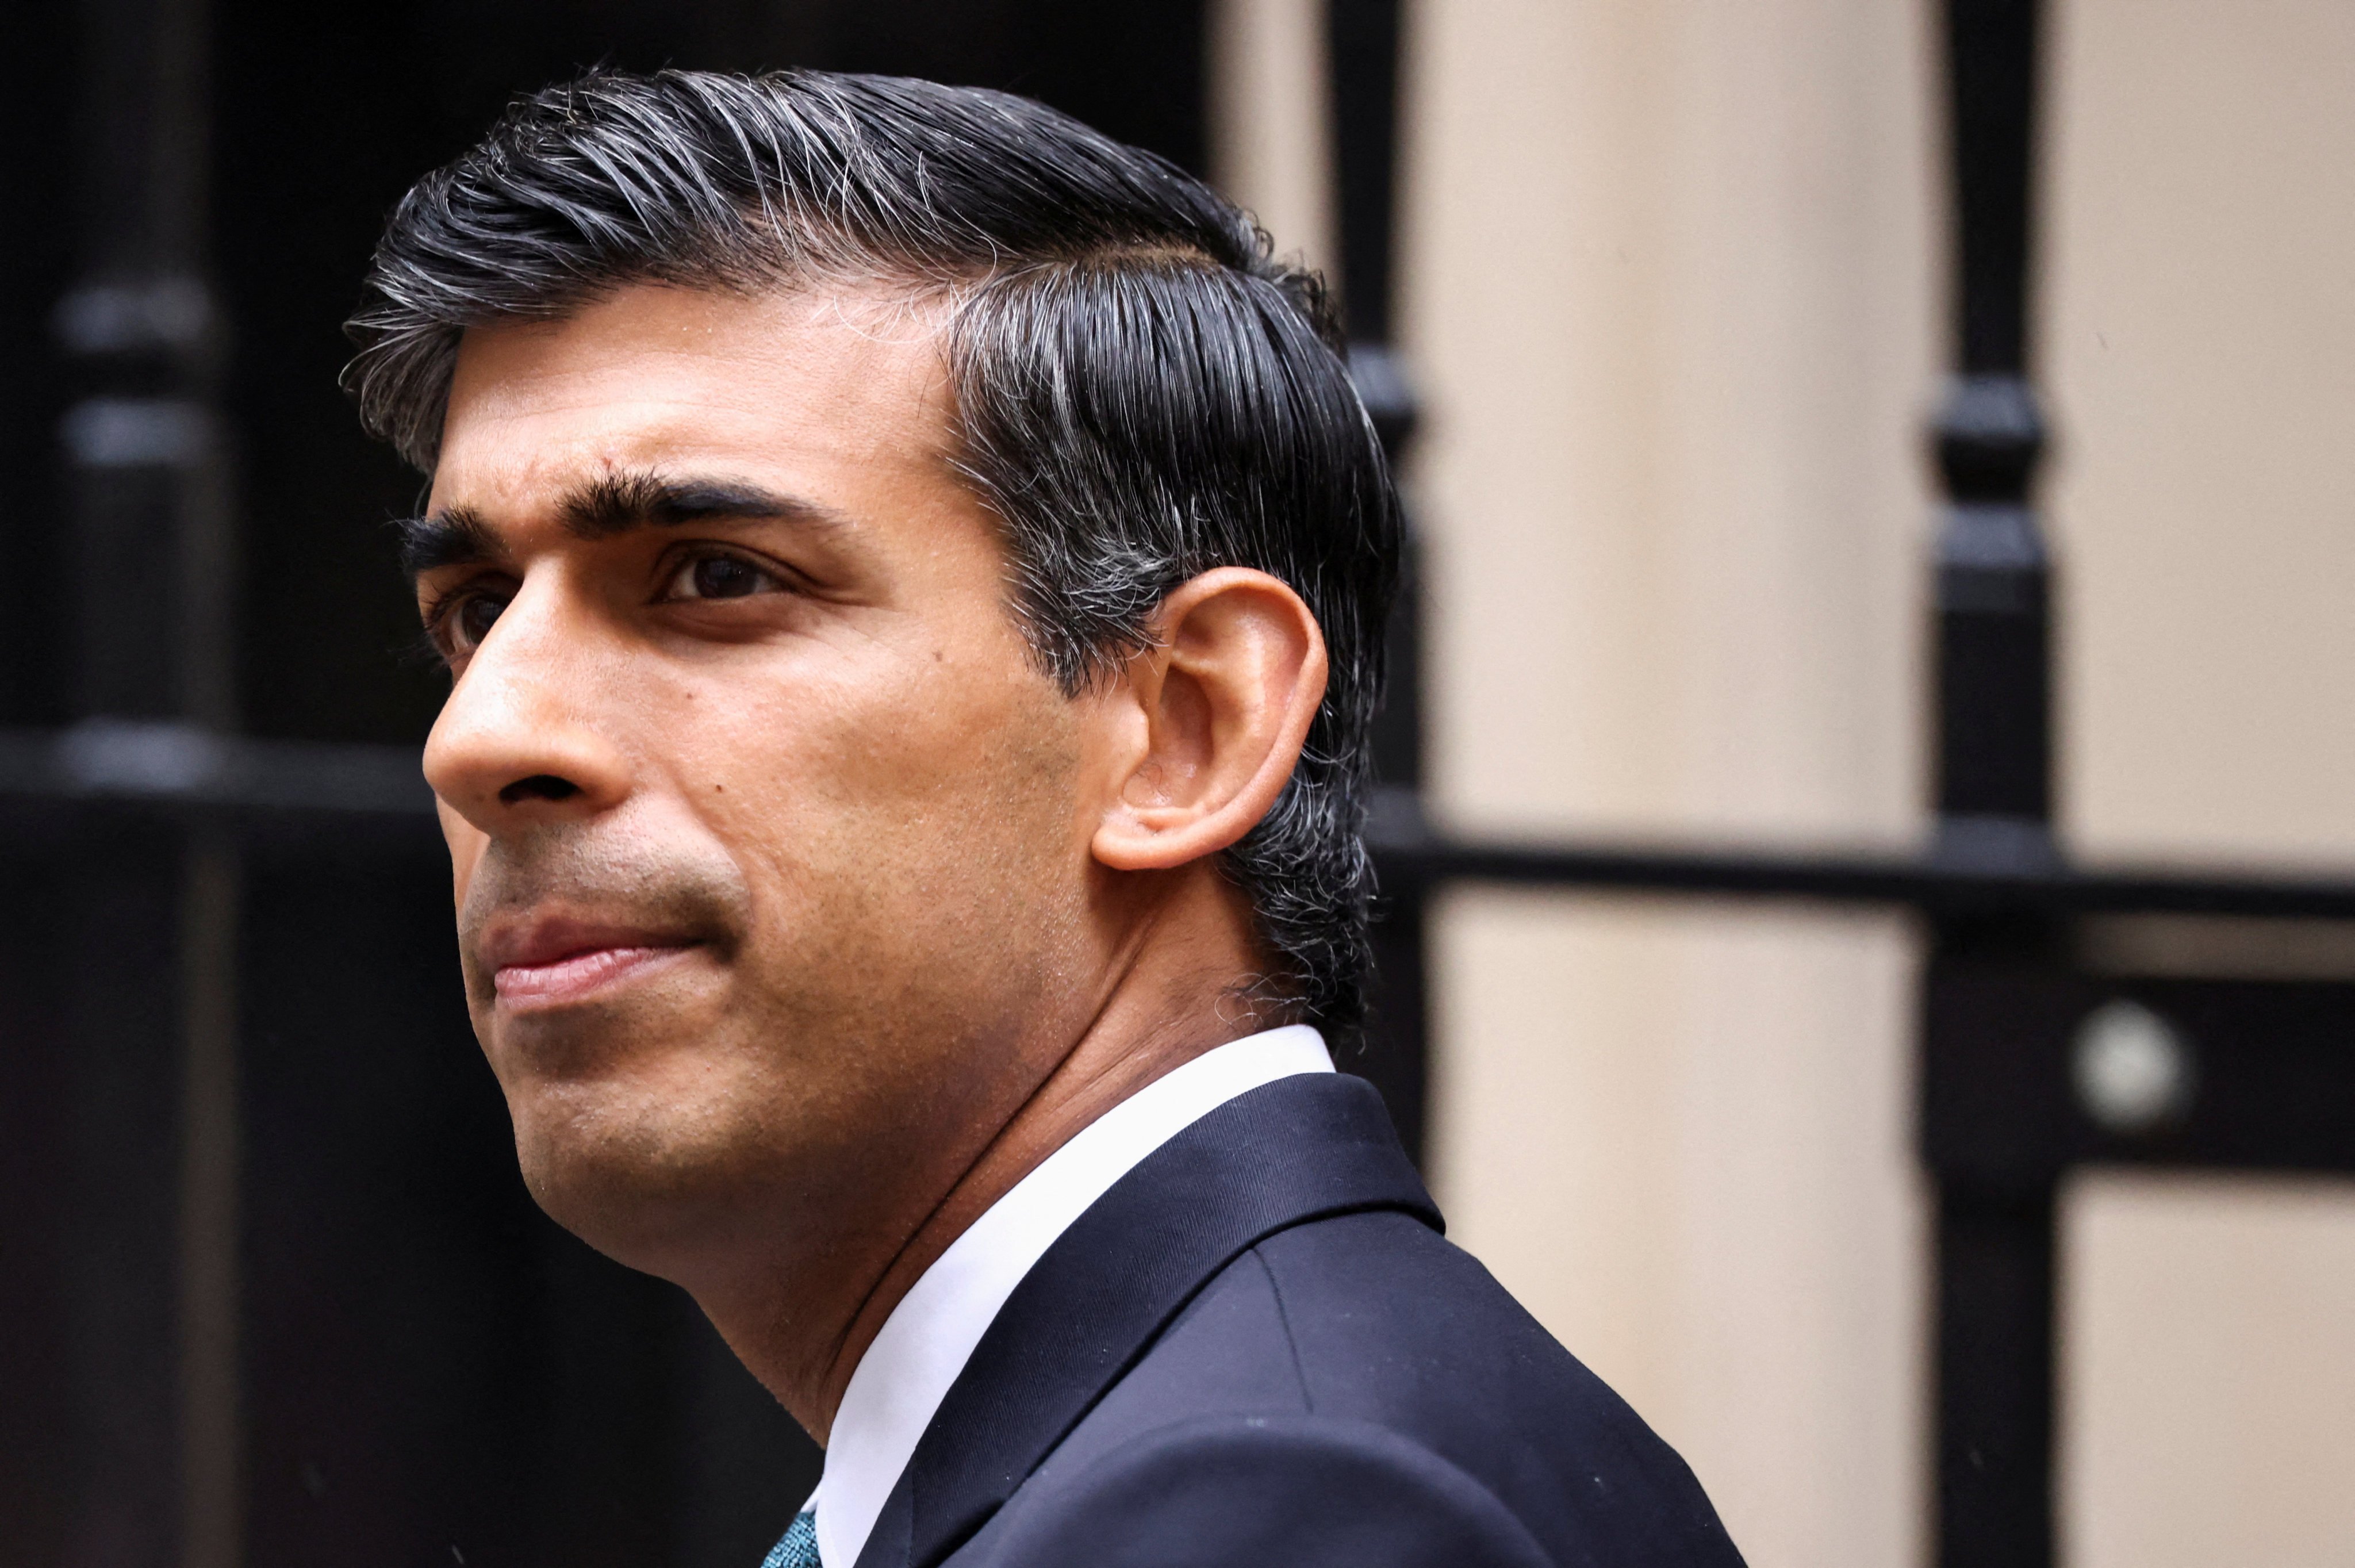 Several Hongkongers living in the United Kingdom have welcomed the new prime minister, Rishi Sunak, but are concerned by the country’s economic woes. Photo: Reuters